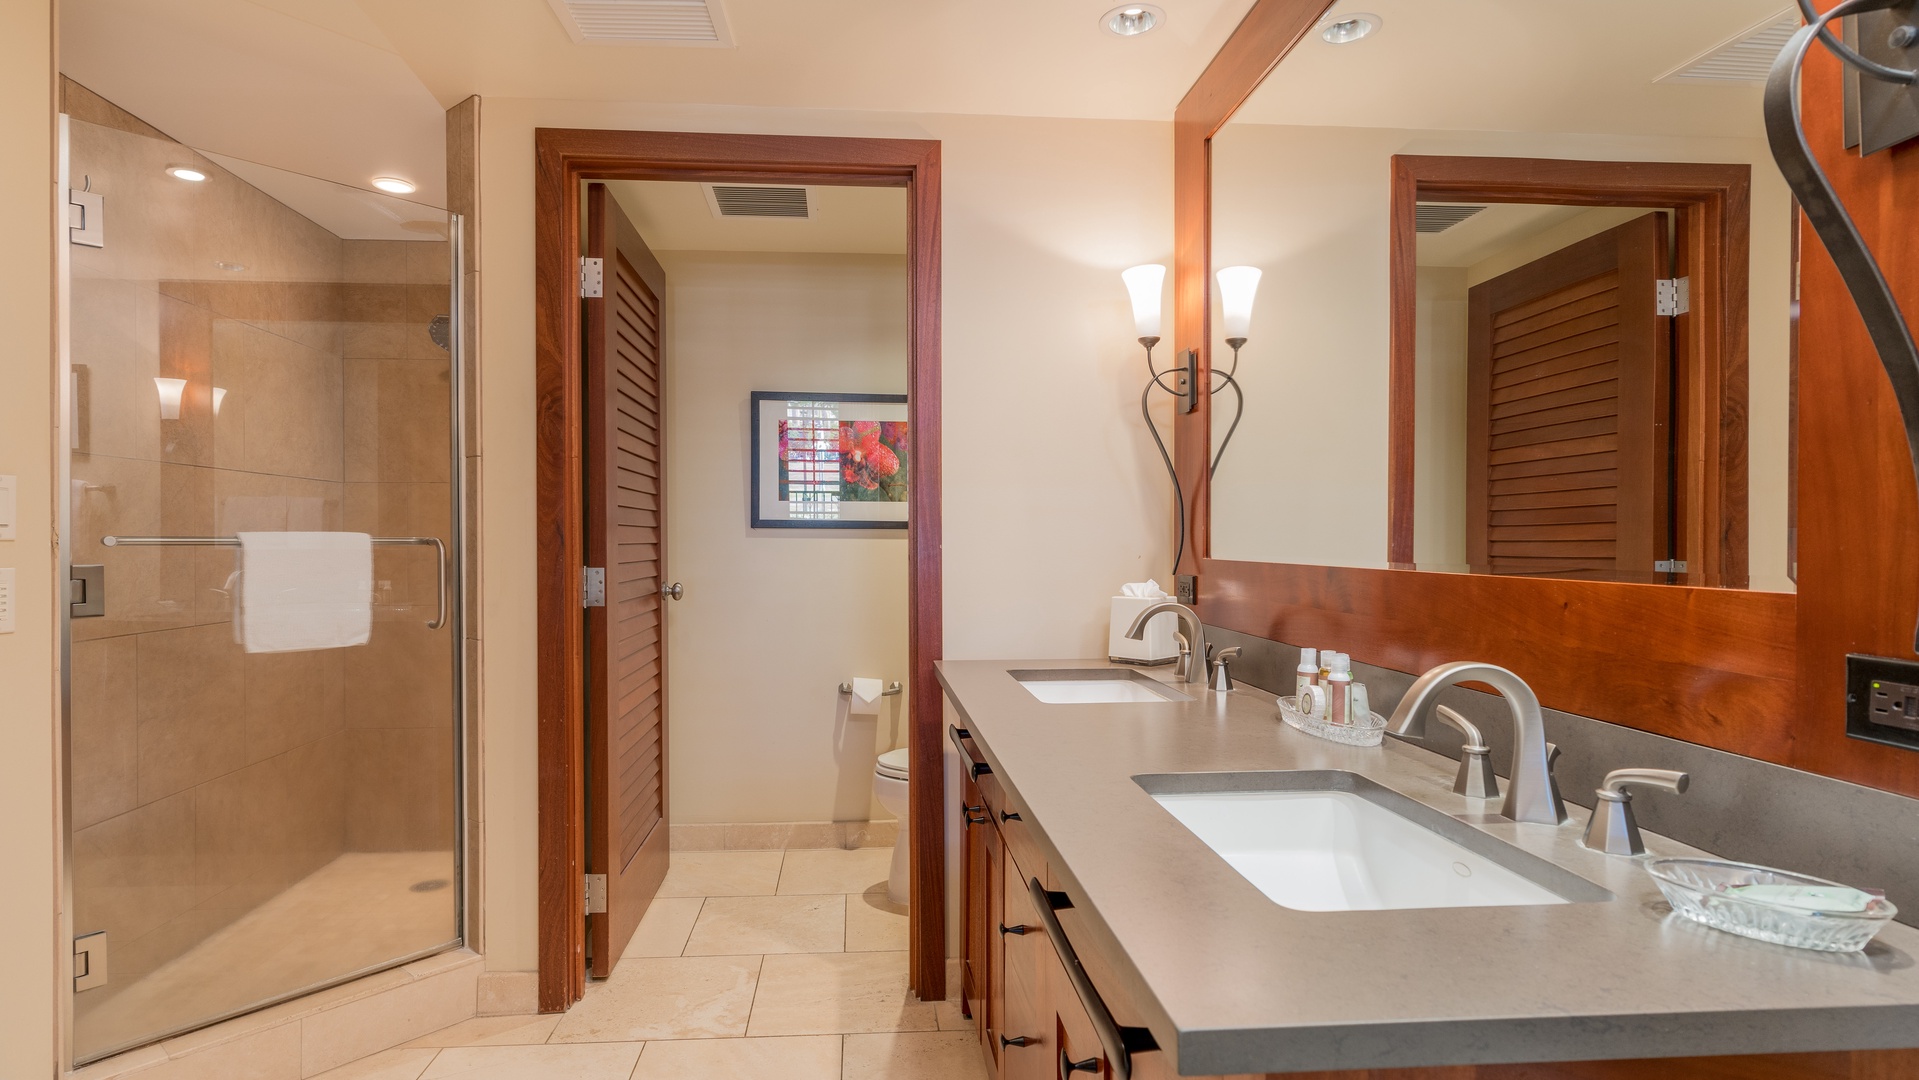 Kapolei Vacation Rentals, Ko Olina Beach Villas B202 - The primary guest bathroom walk-in shower and double vanity.